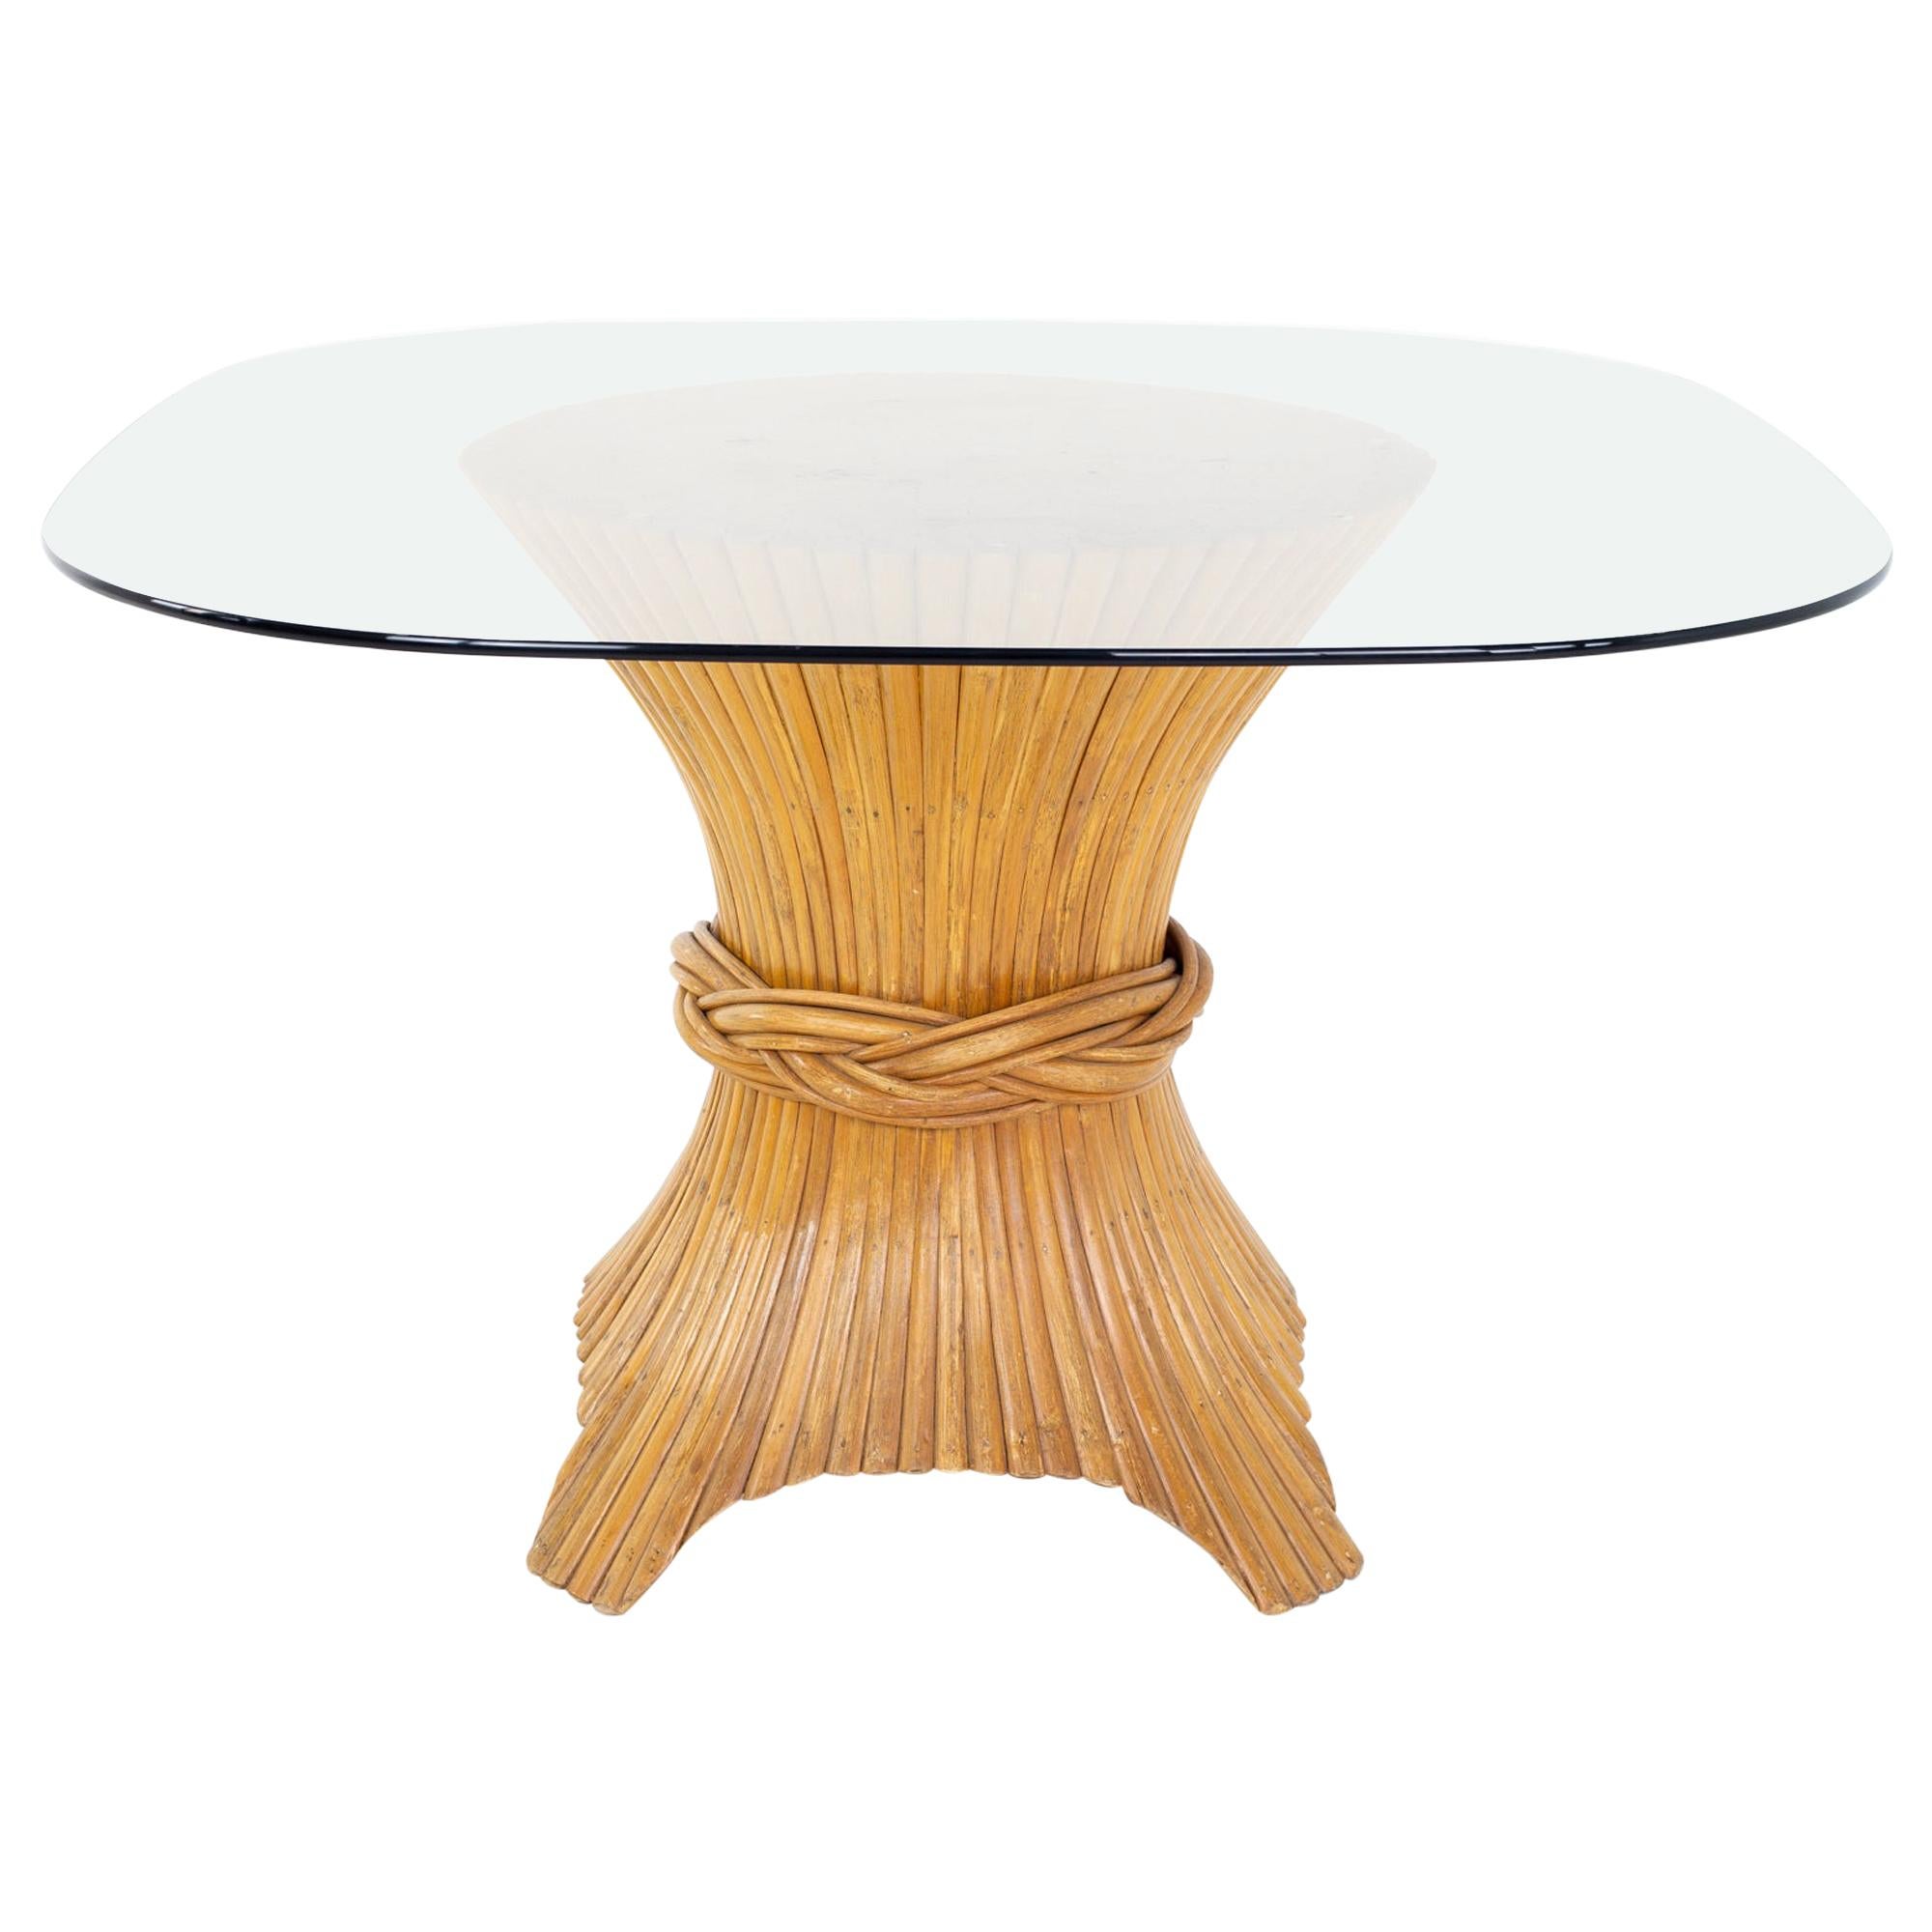 McGuire Mid Century Bamboo Sheath Glass Dining Table